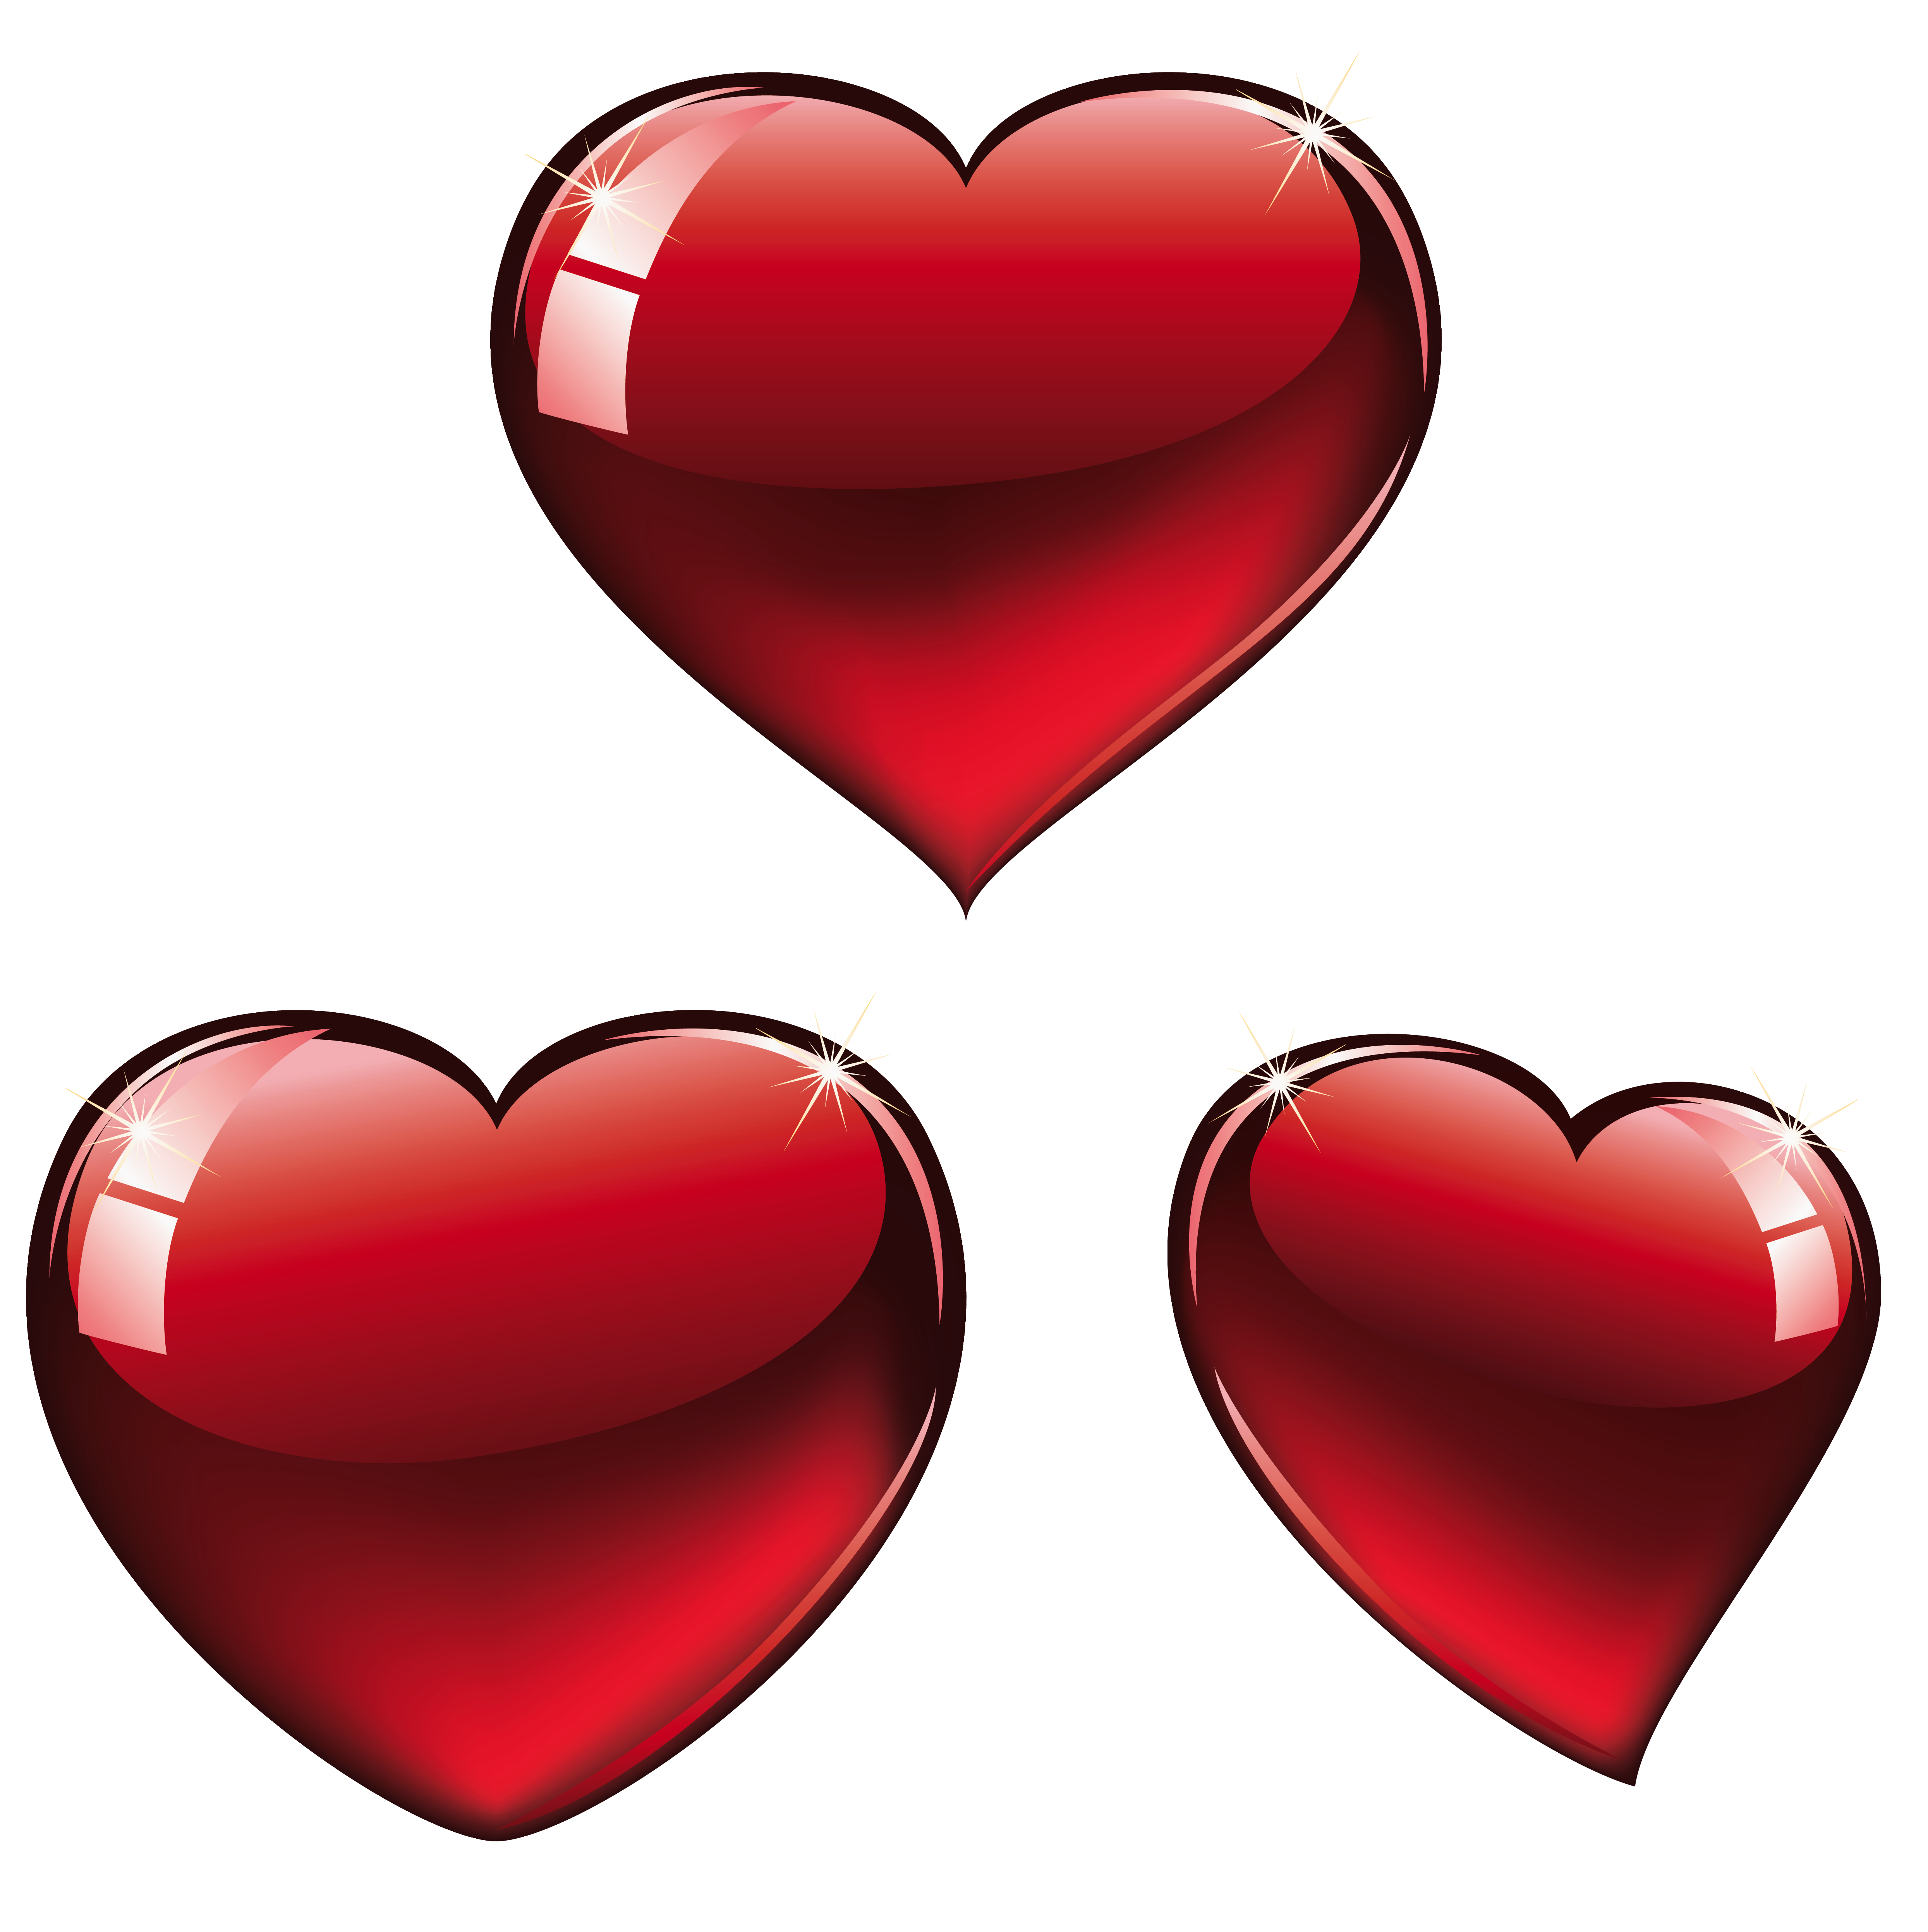 large red heart printable  Love png, Free clip art, Heart images hd